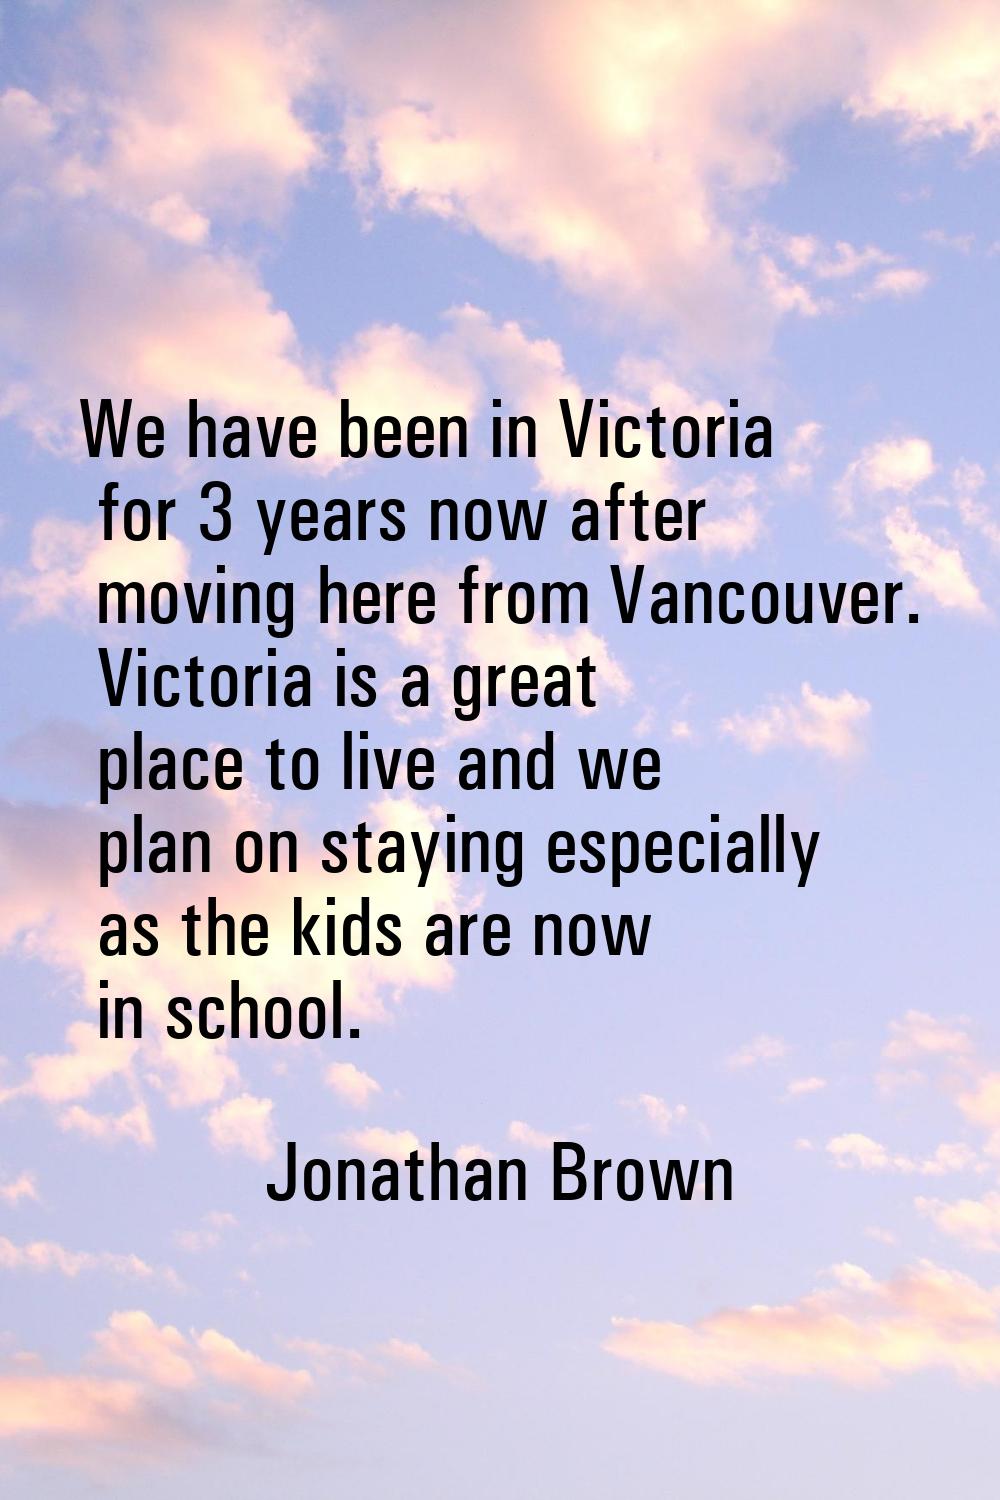 We have been in Victoria for 3 years now after moving here from Vancouver. Victoria is a great plac